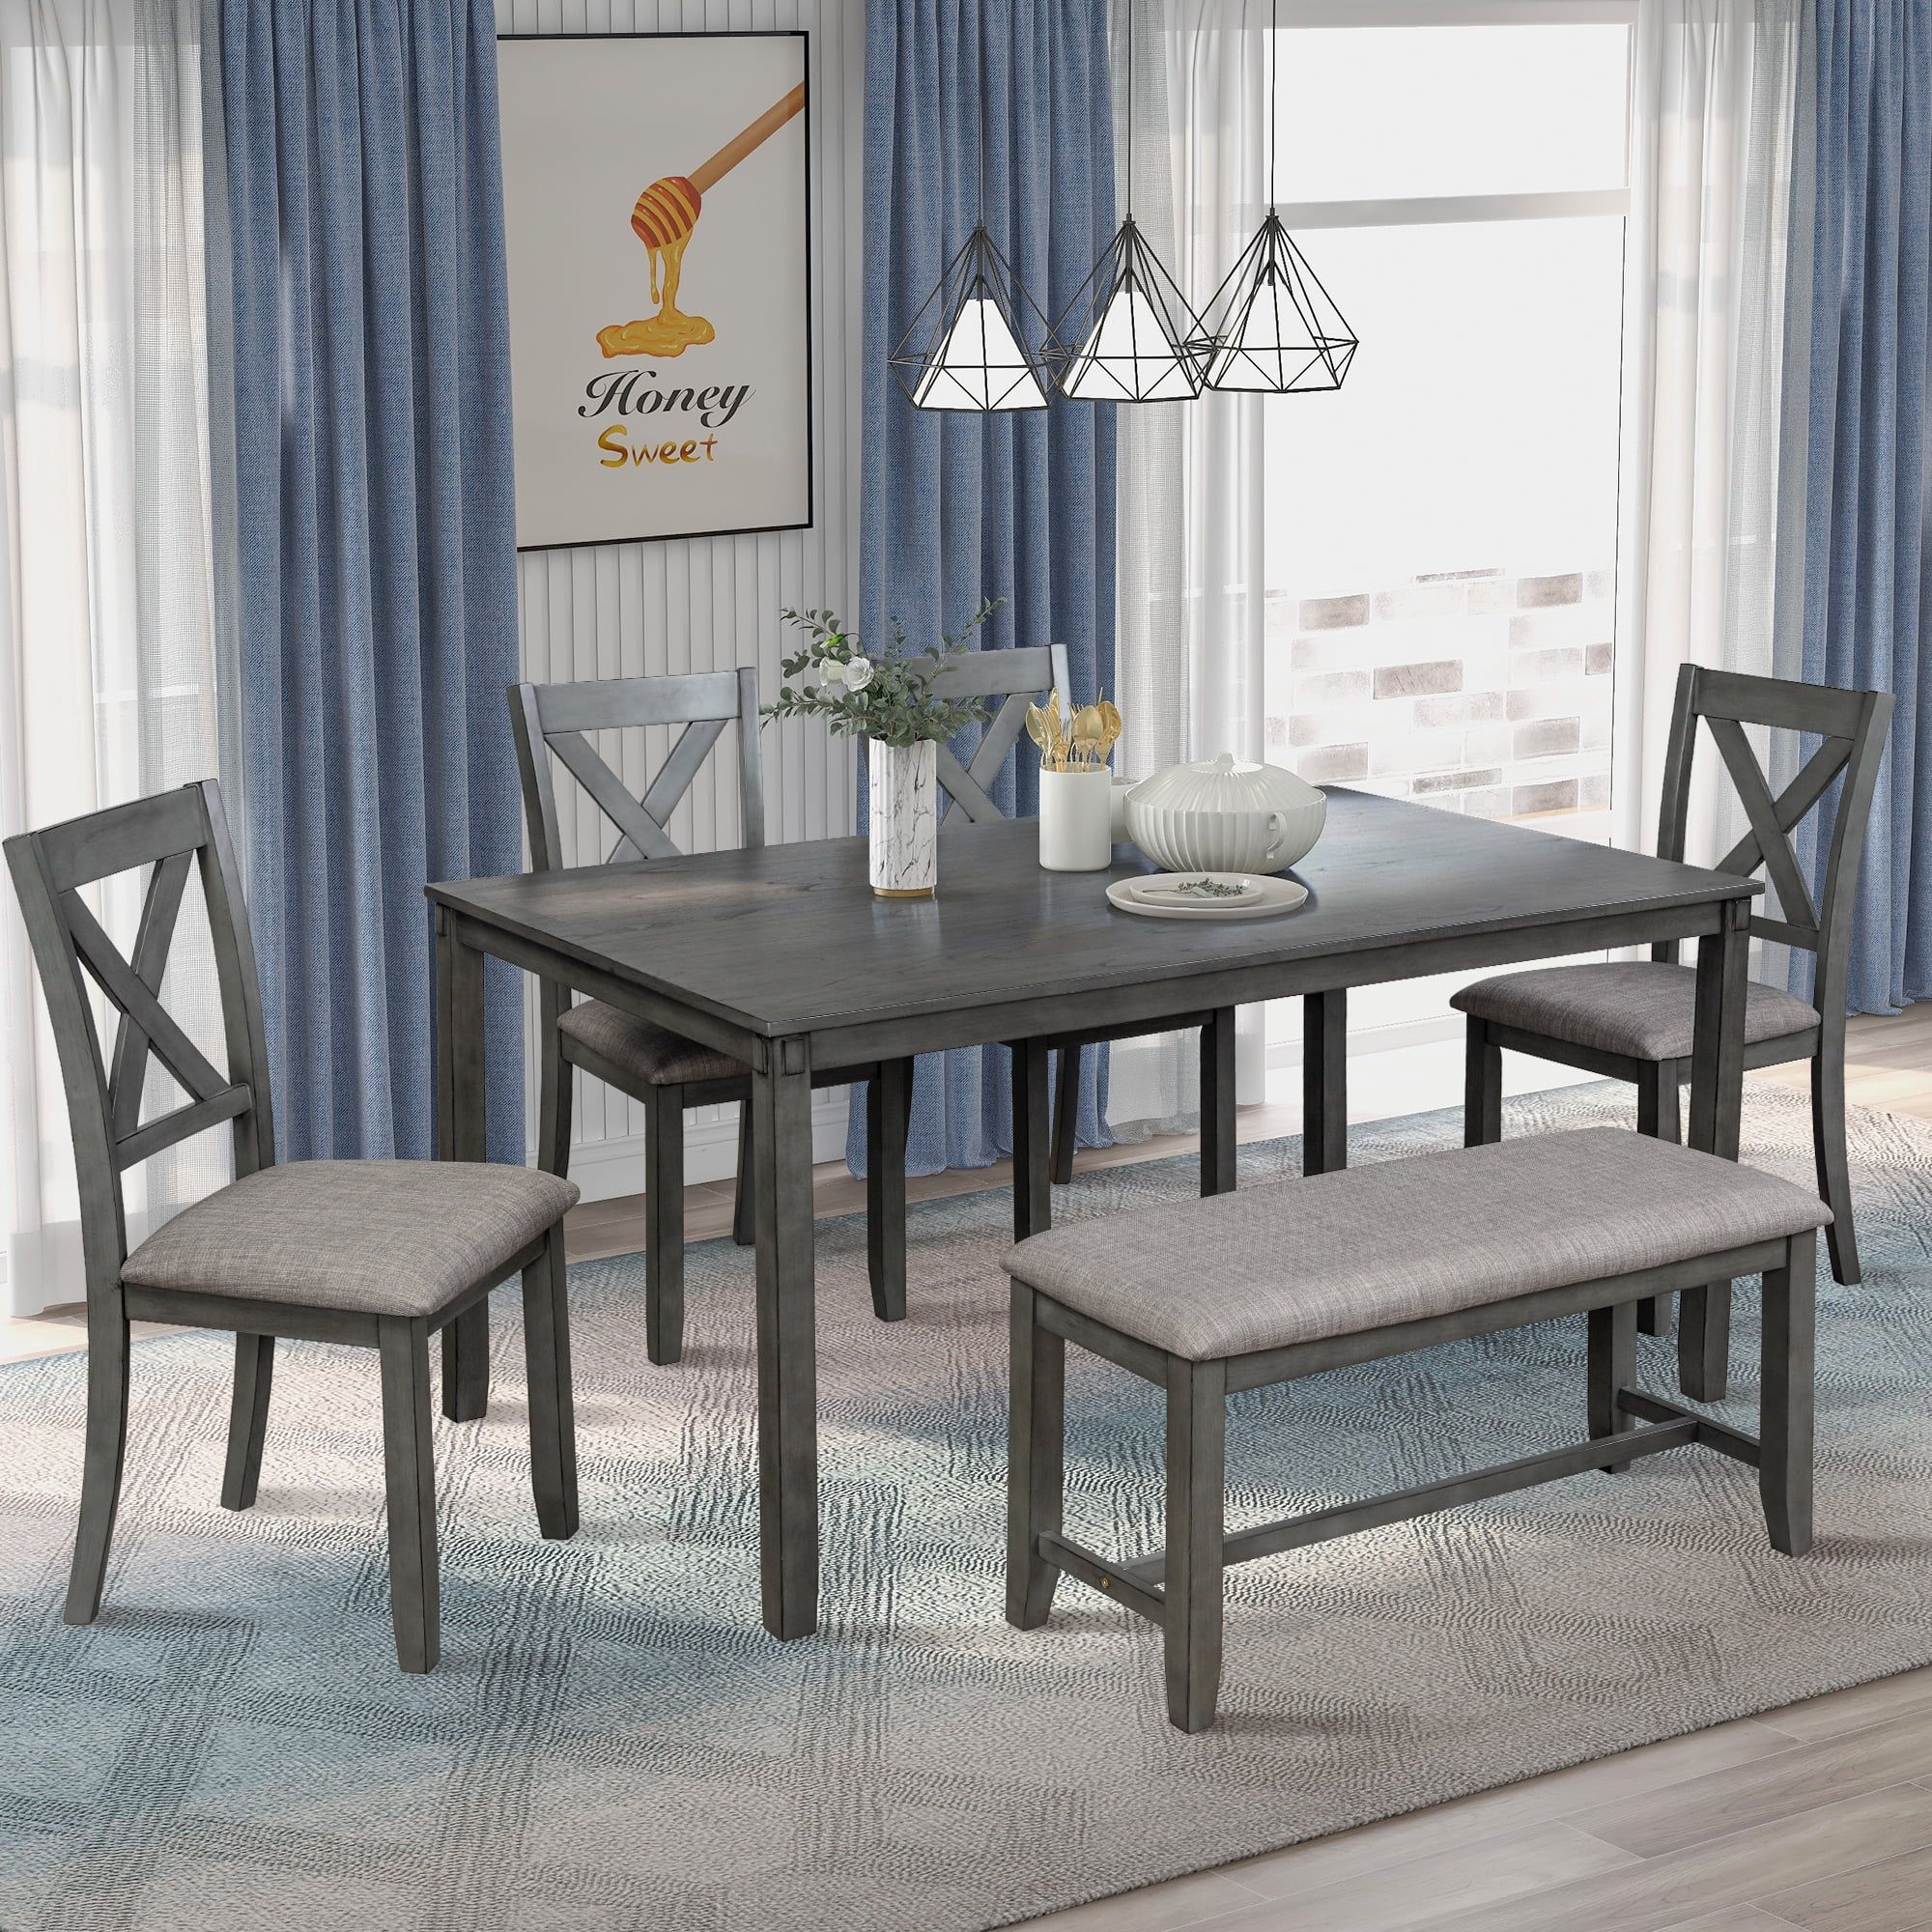 6 Piece Dining Table Set, Modern Home Dining Set with Table, Bench & 4 Cushioned Chairs, Wood Rec... | Walmart (US)